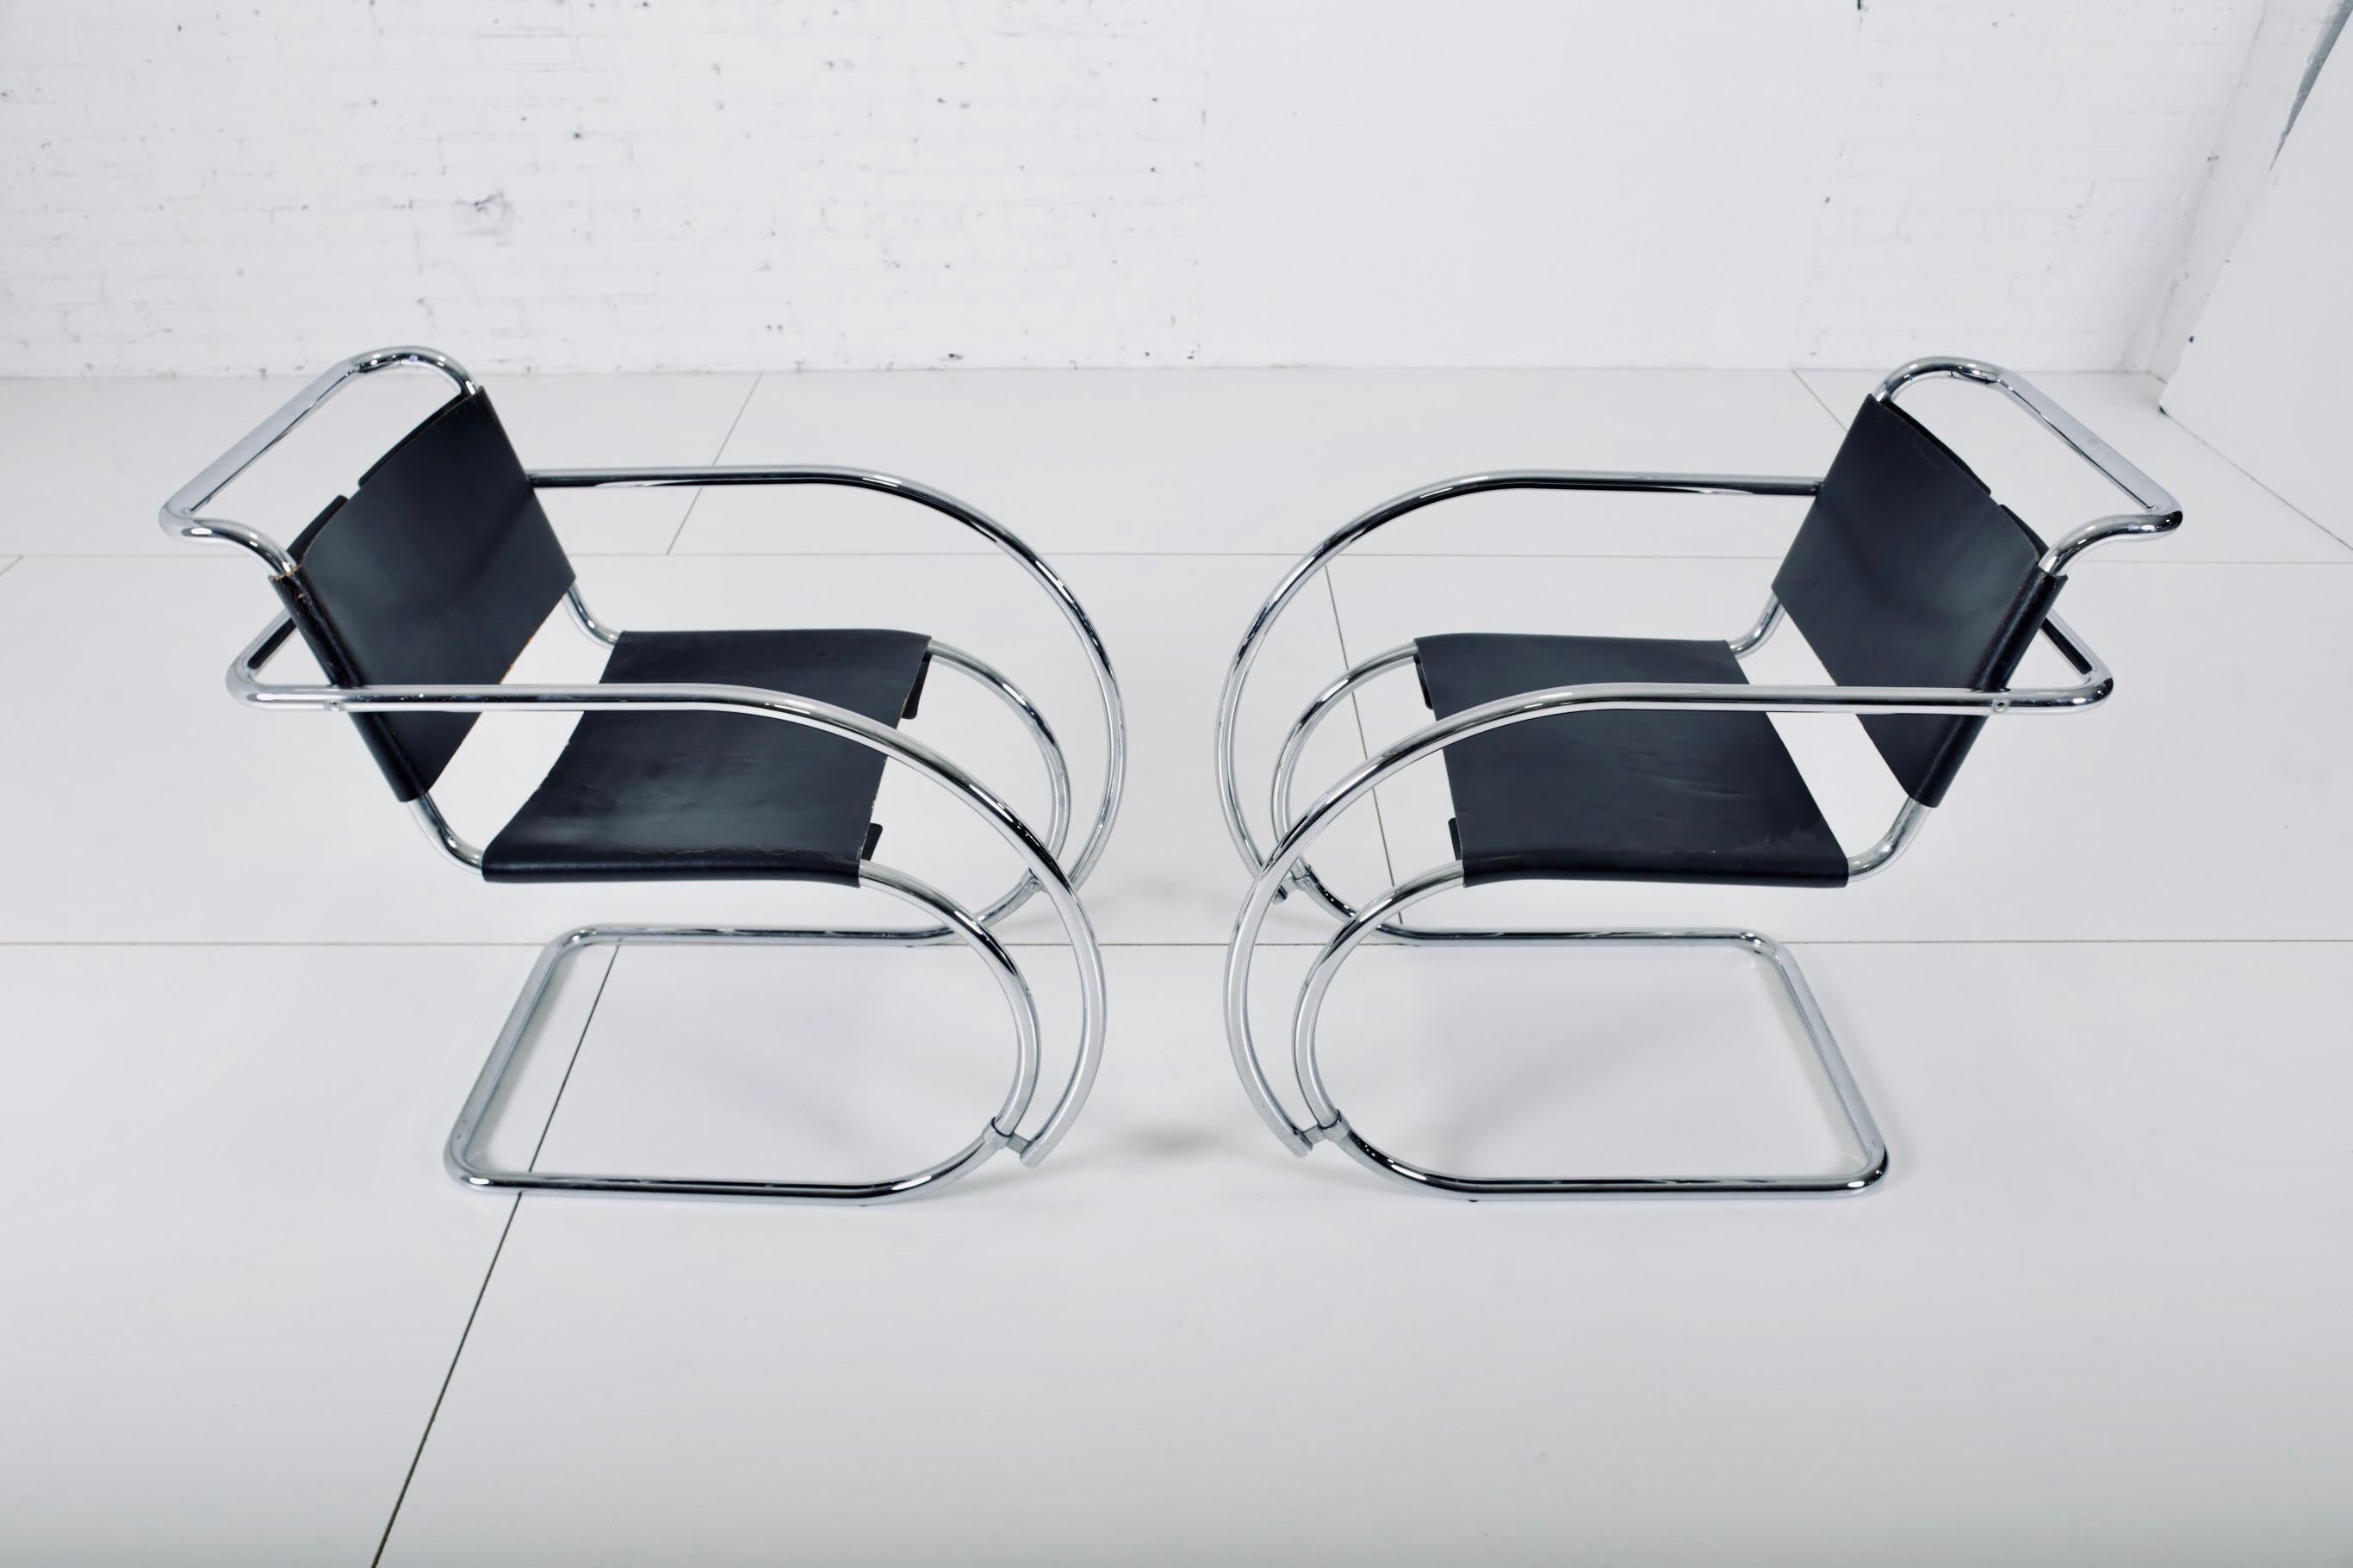 Pair of 1960s MR20 armchairs designed by Mies van der Rohe for Knoll. Original leather and stainless steel frames are in great shape. Chairs have early Knoll labels.

 